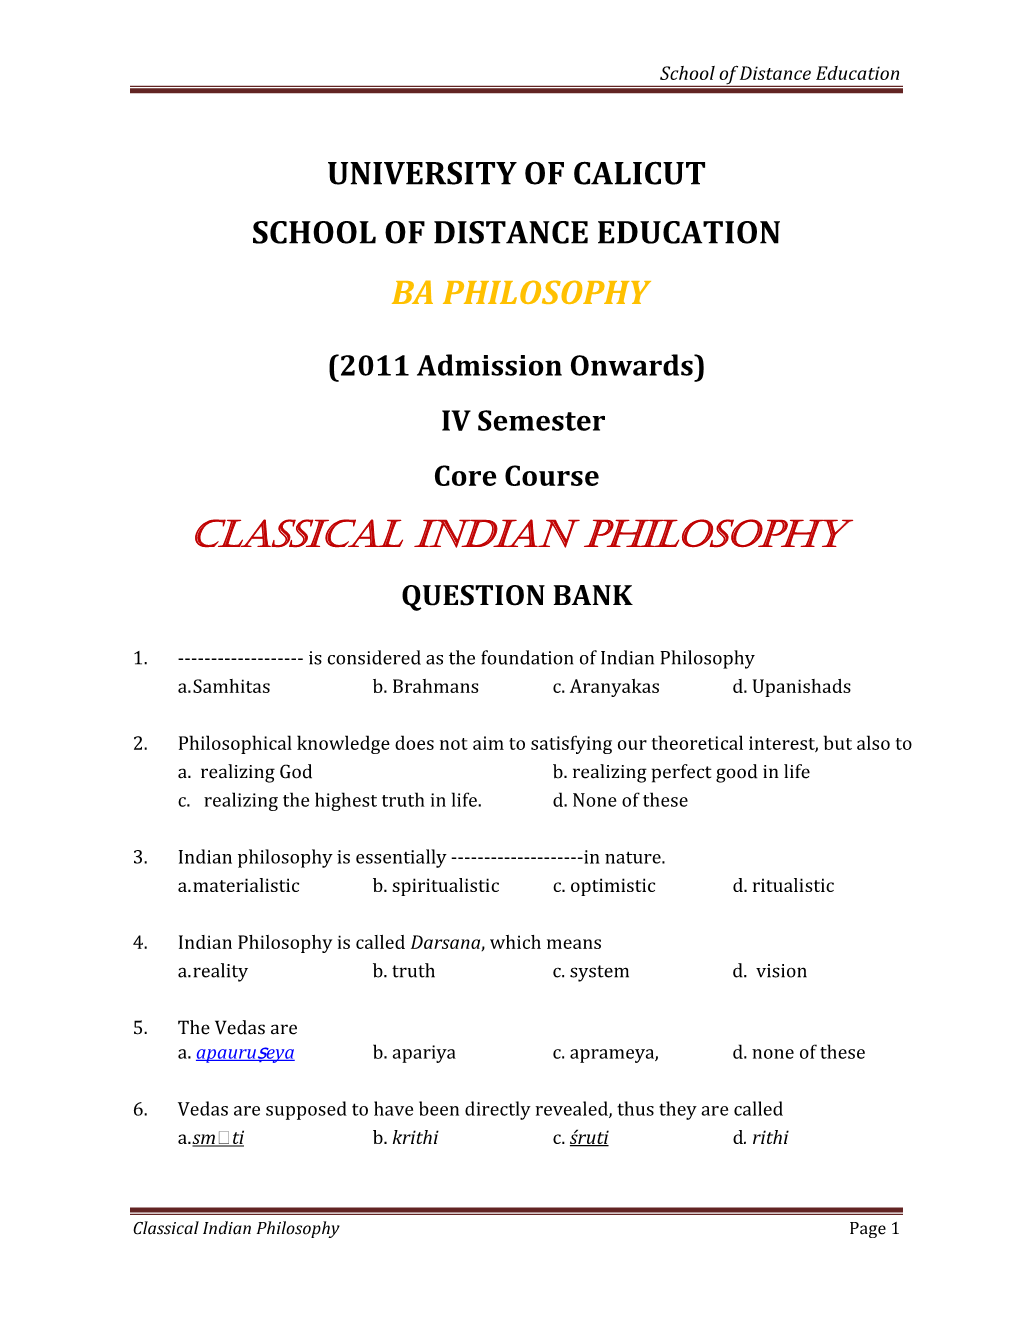 Classical Indian Philosophy Question Bank